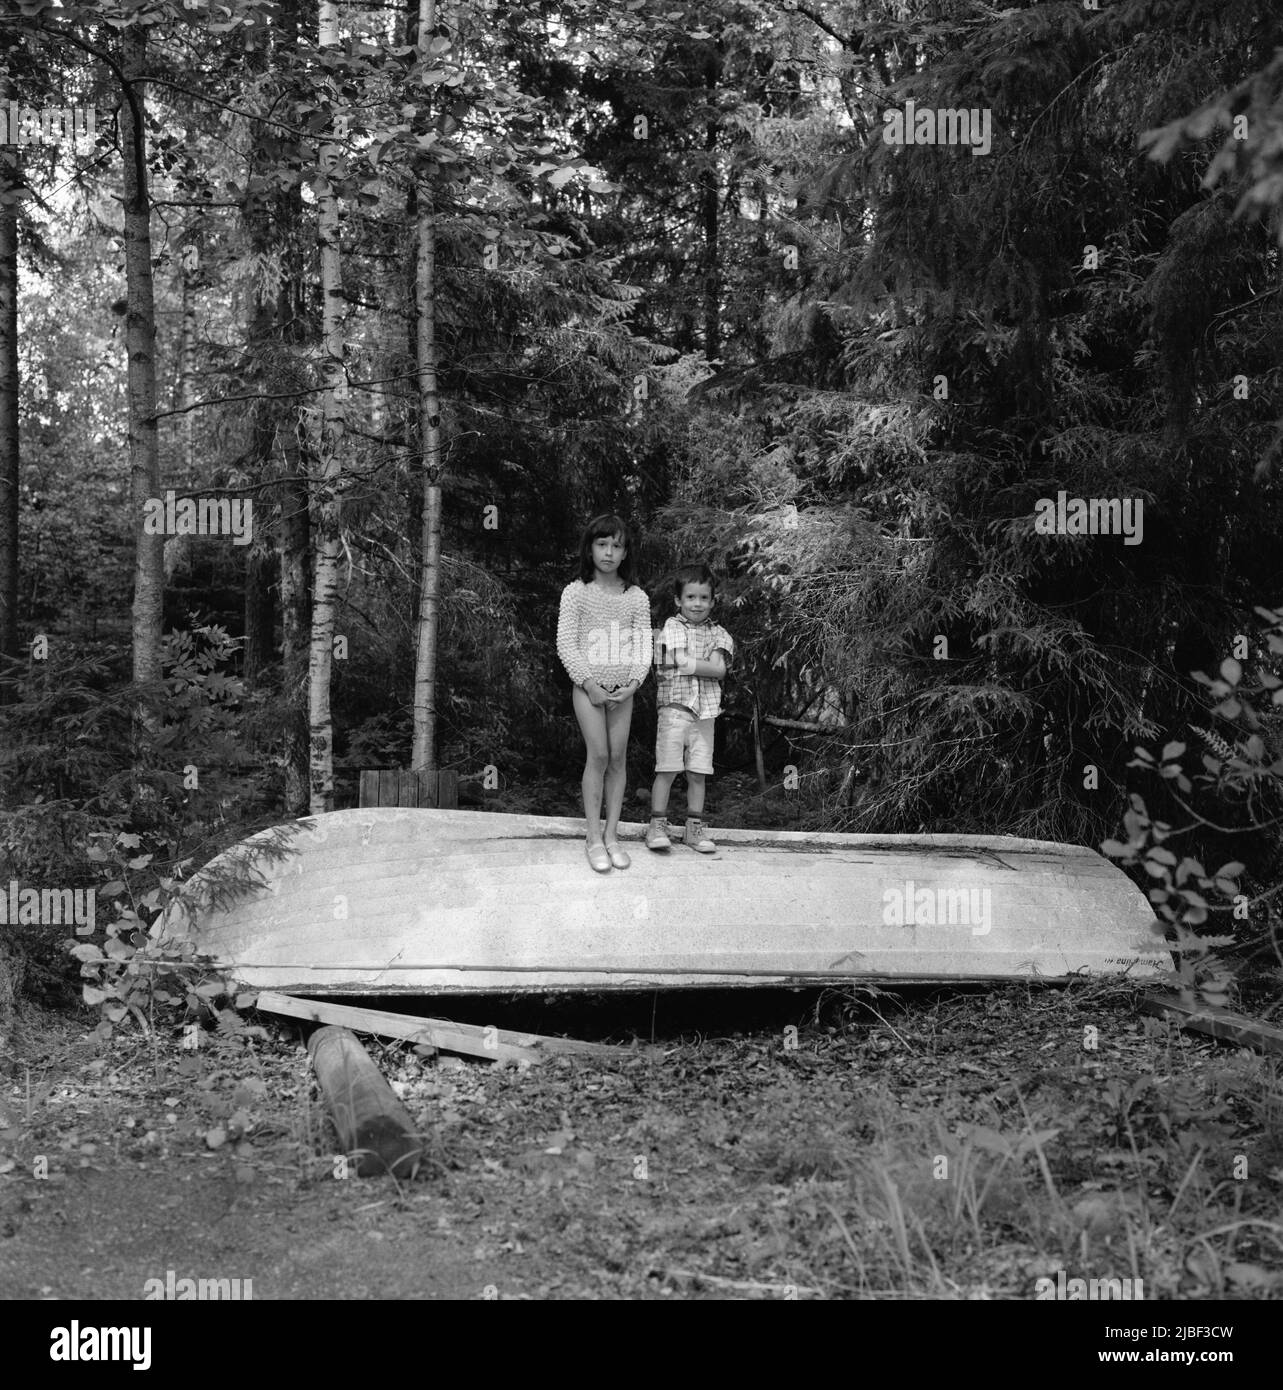 Children standing on overturned boat in forest Stock Photo